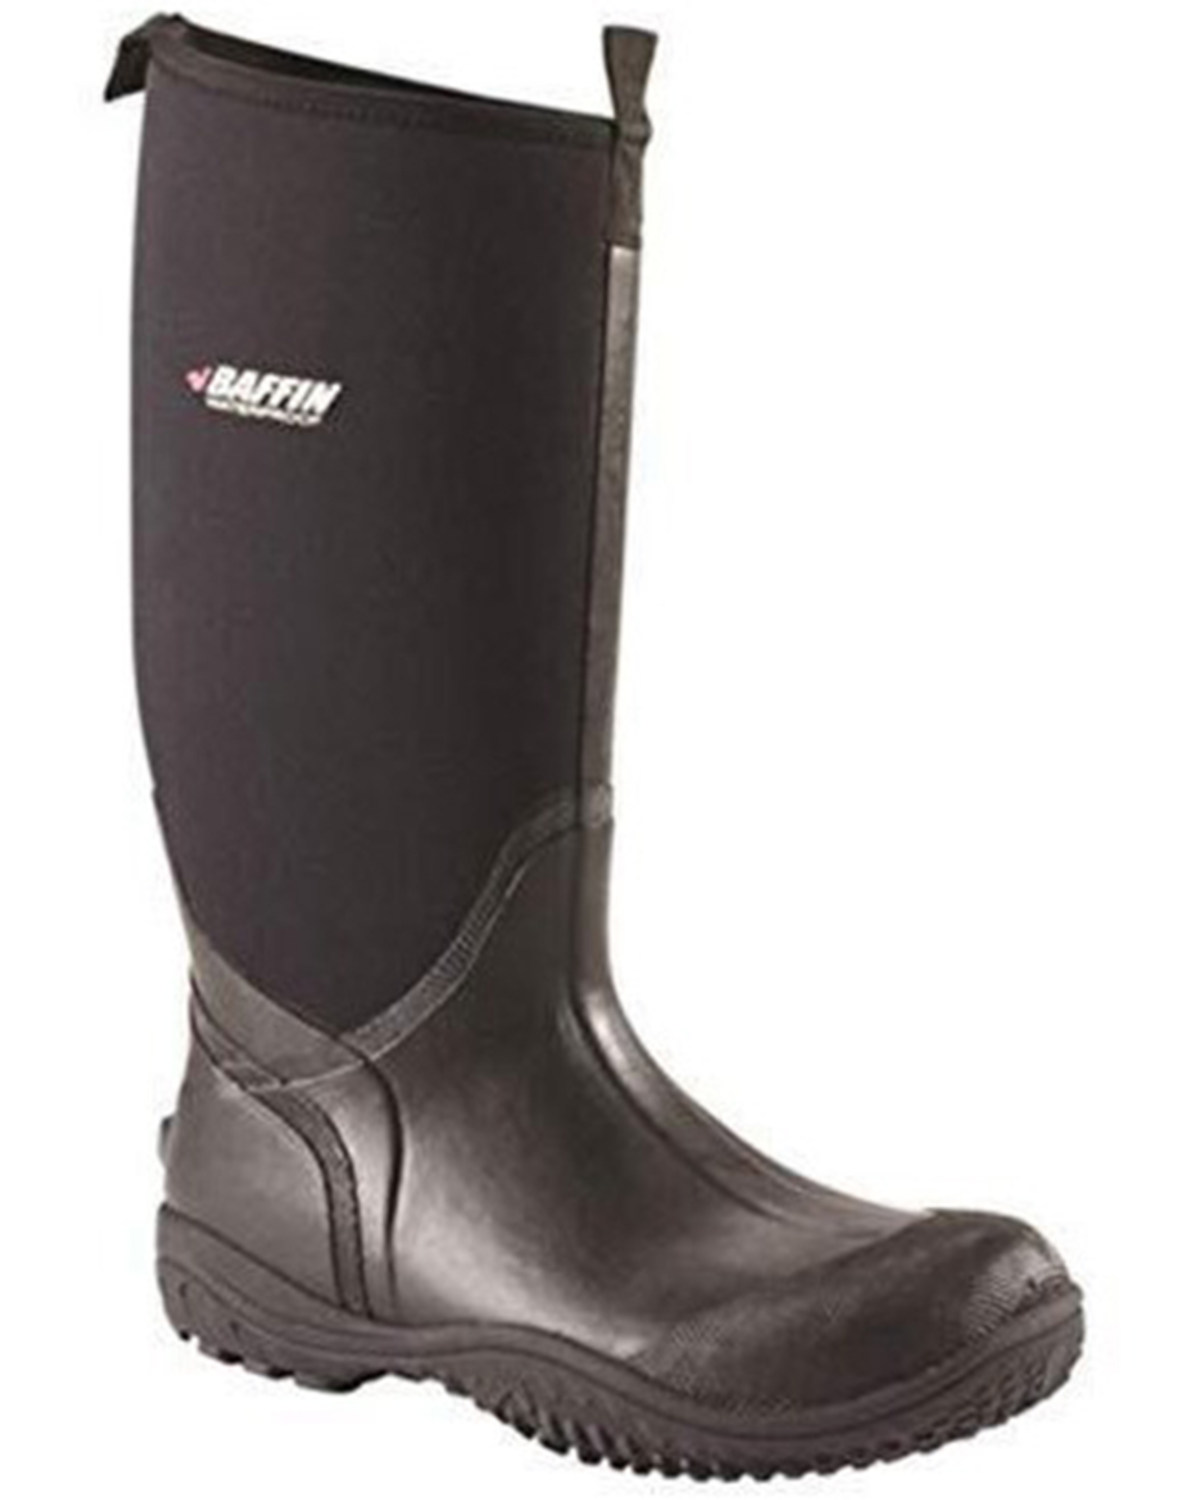 Baffin Men's Marsh Series Meltwater Boots - Round Toe